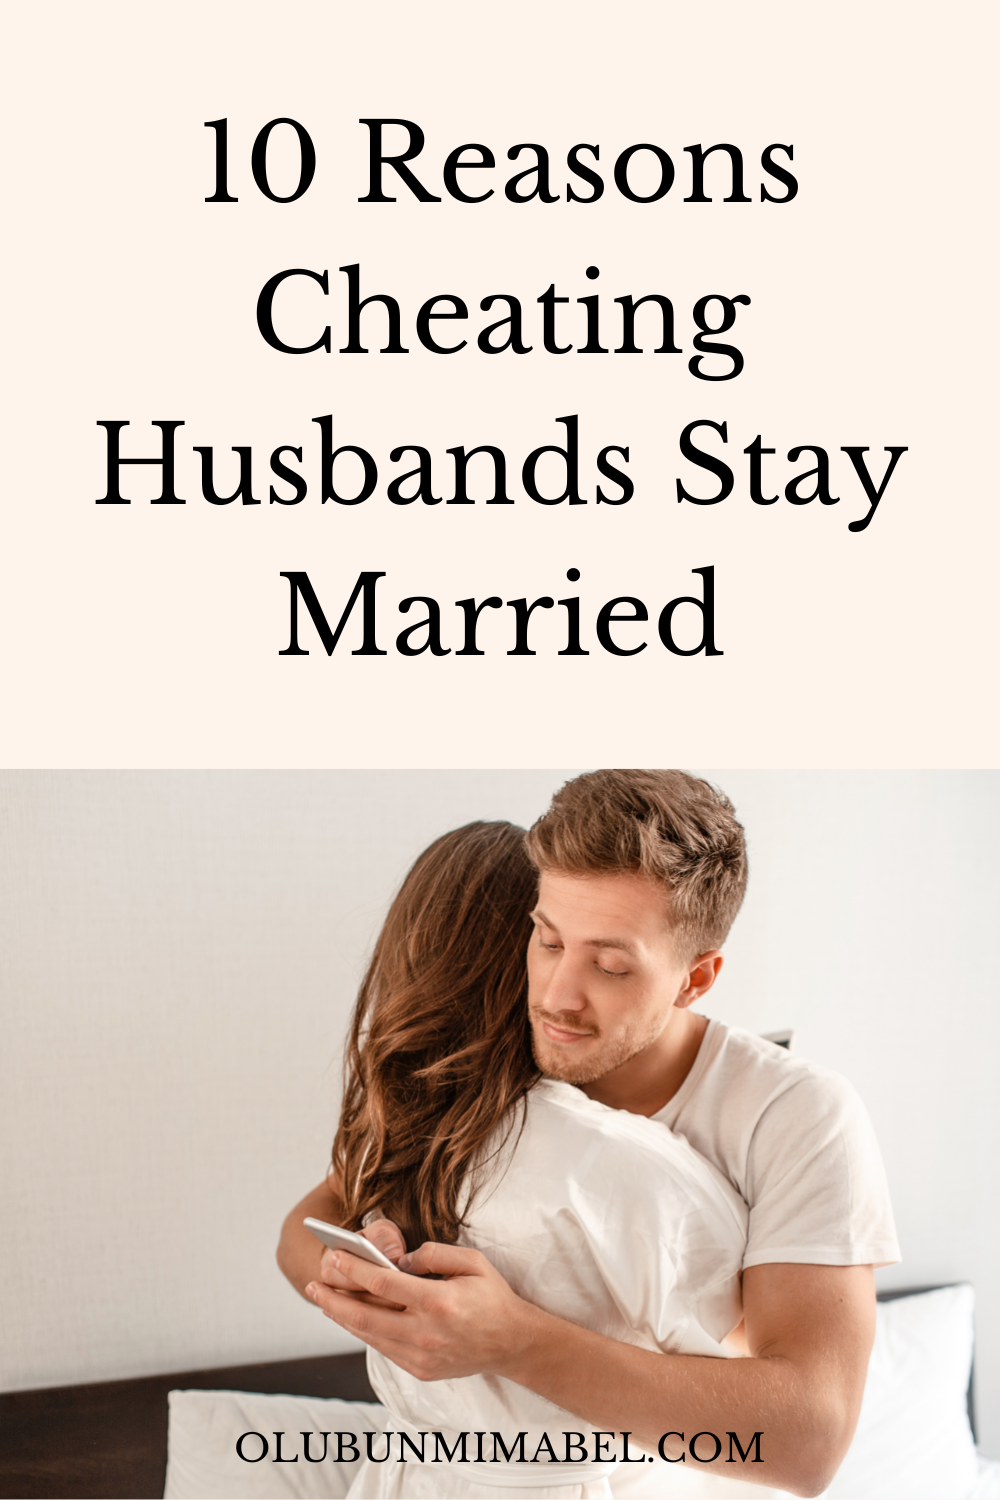 Why Do Cheating Husbands Stay Married?